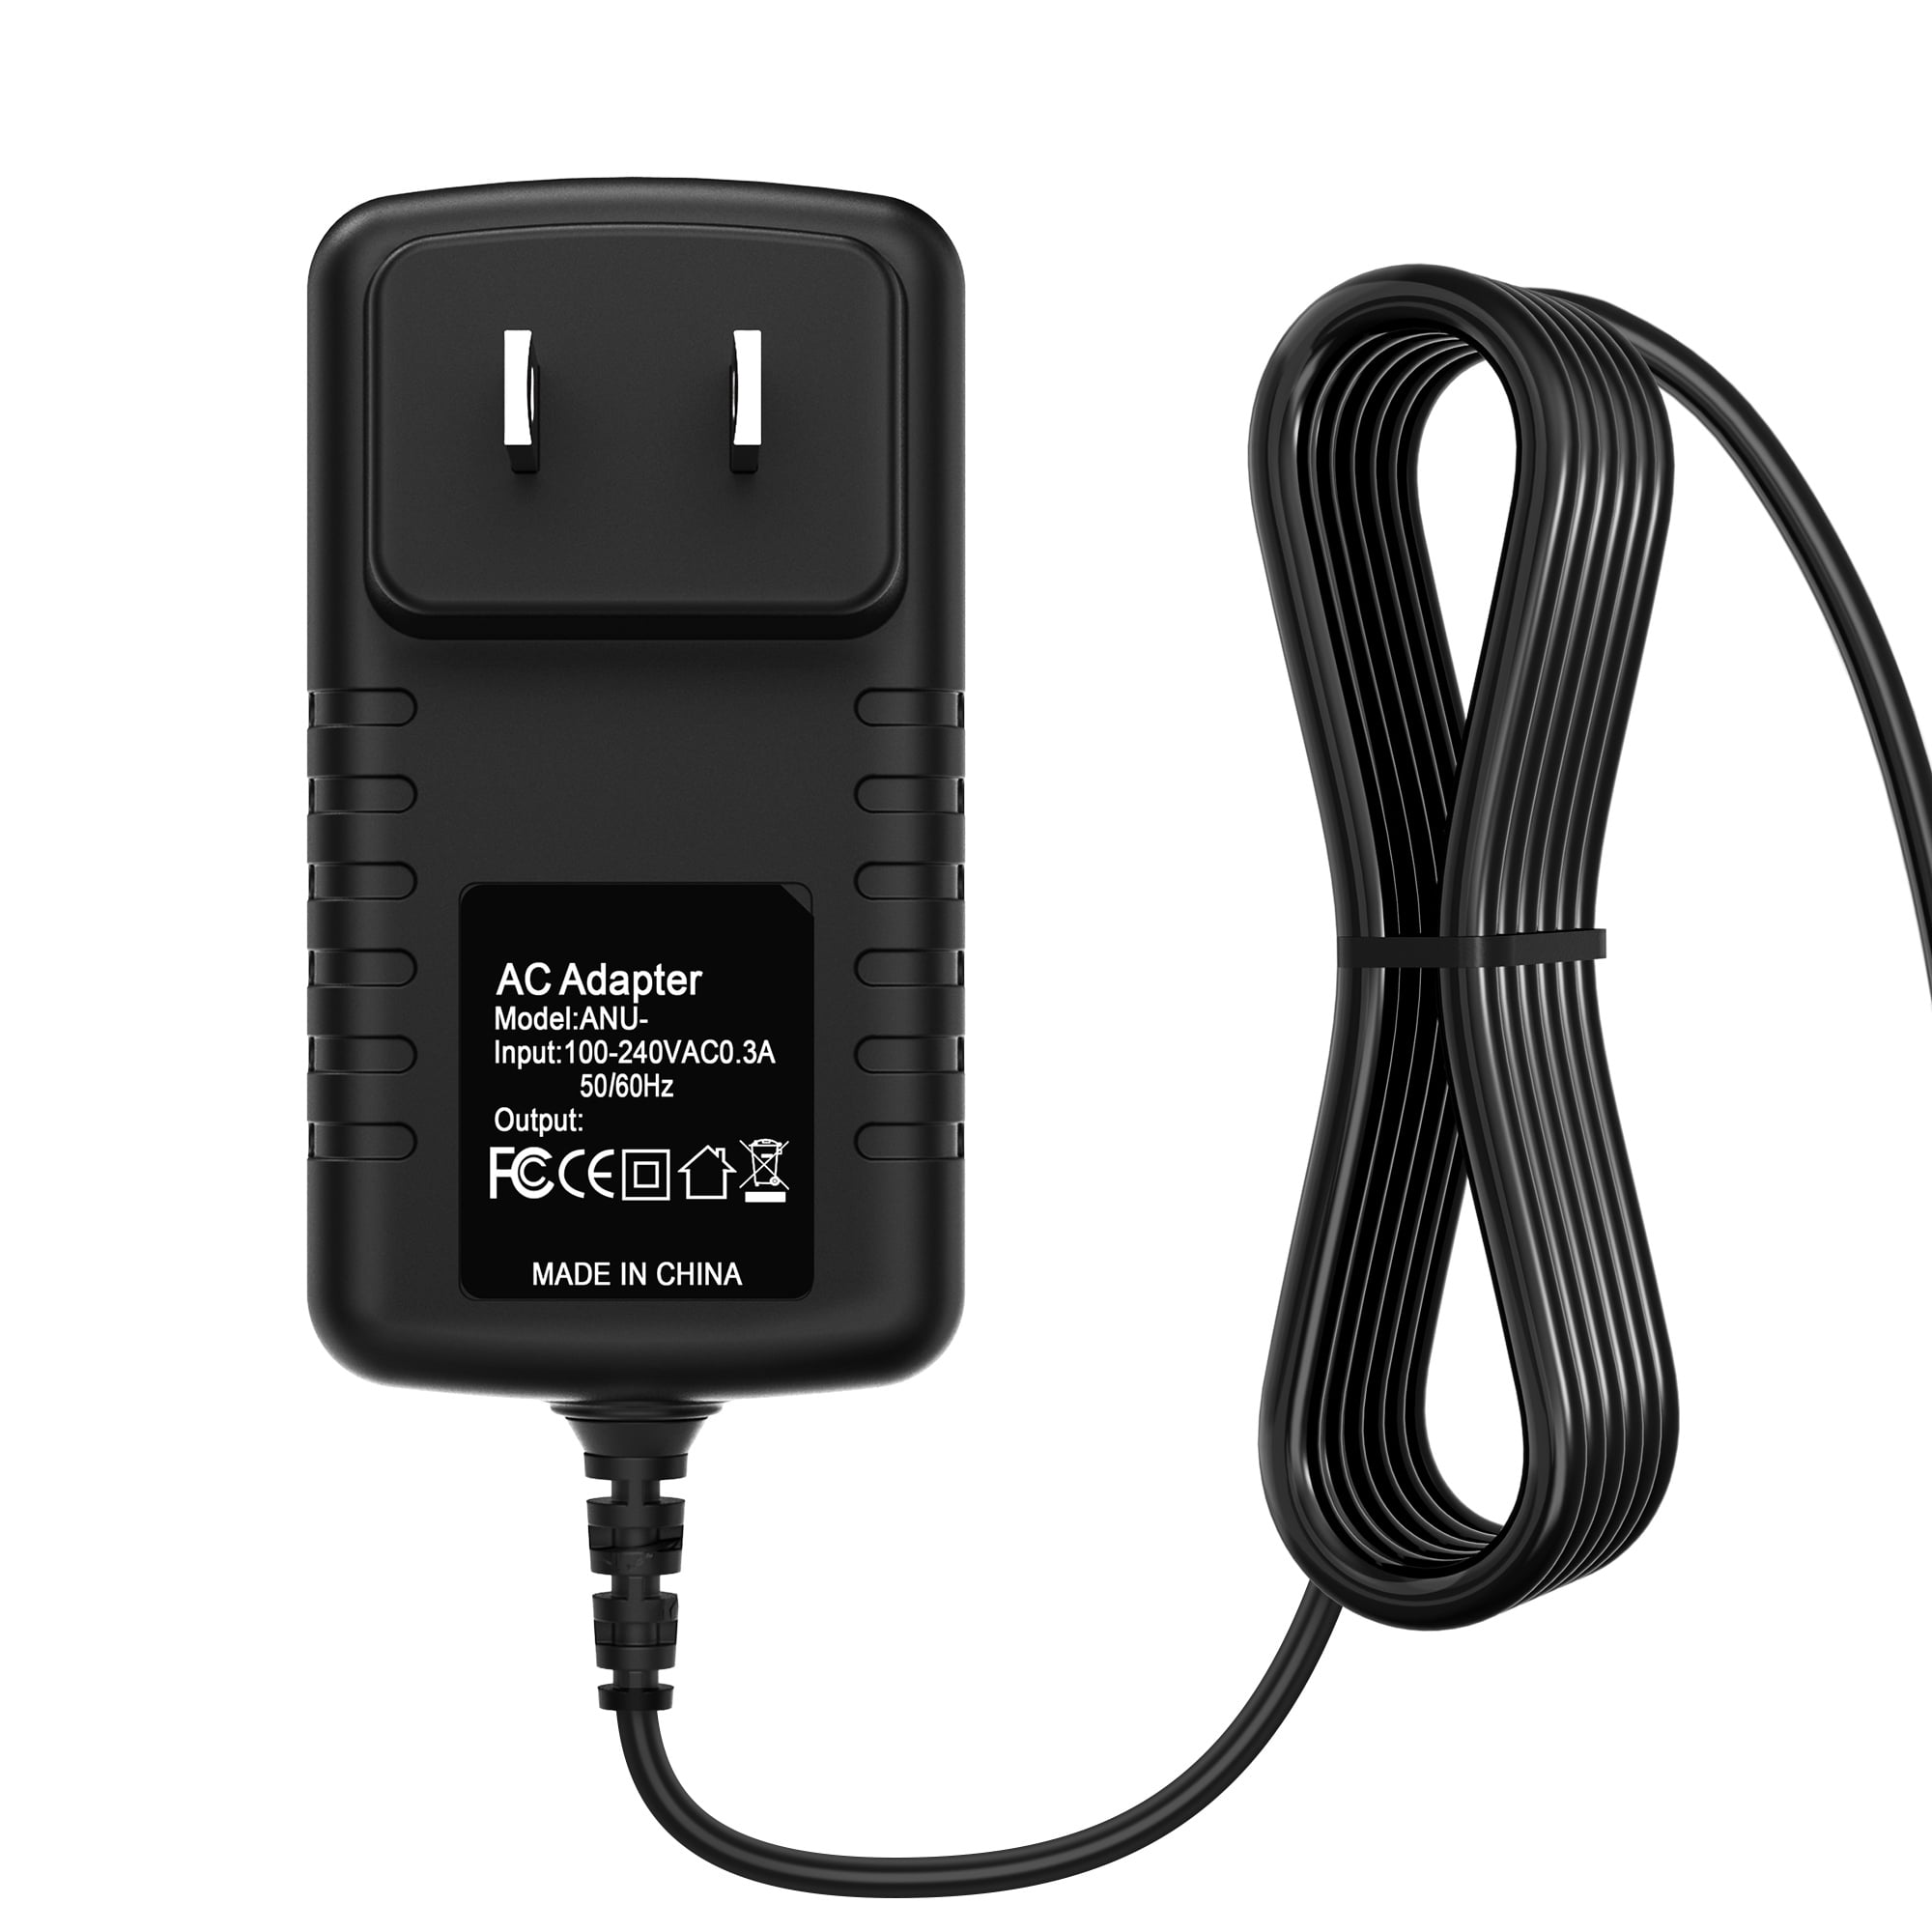 Konflikt fuzzy Besættelse K-MAINS AC/DC Adapter Replacement for Model: GKYPS0120120US1  GKYPS0120120USI Intertek Switching Power Supply Cord Cable PS Wall Home Charger  Mains PSU - Walmart.com